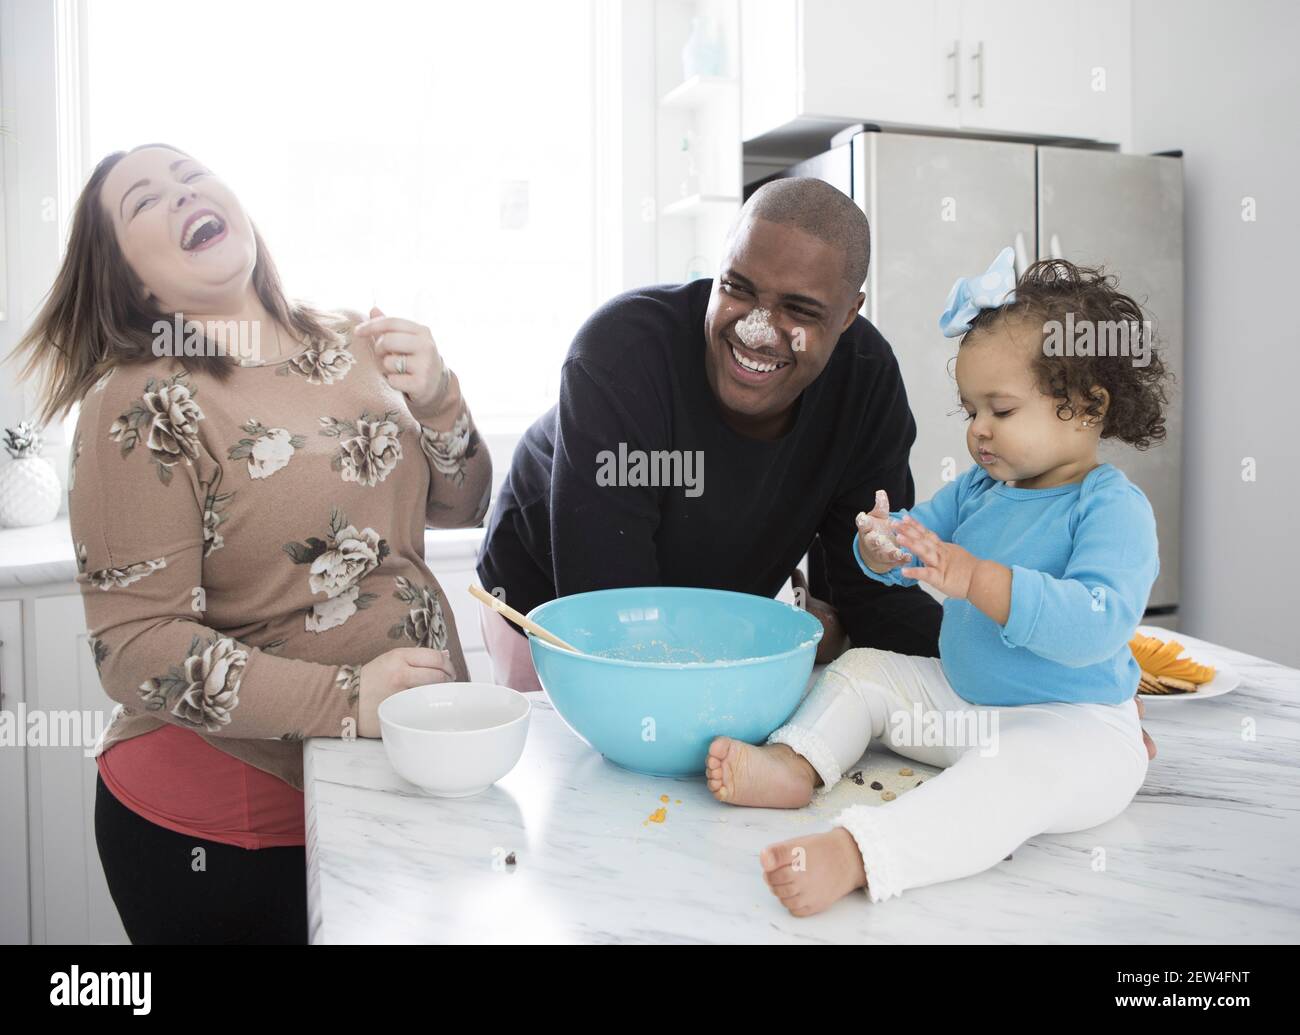 A young interracial family cooking and laughing together in a modern kitchen. Stock Photo